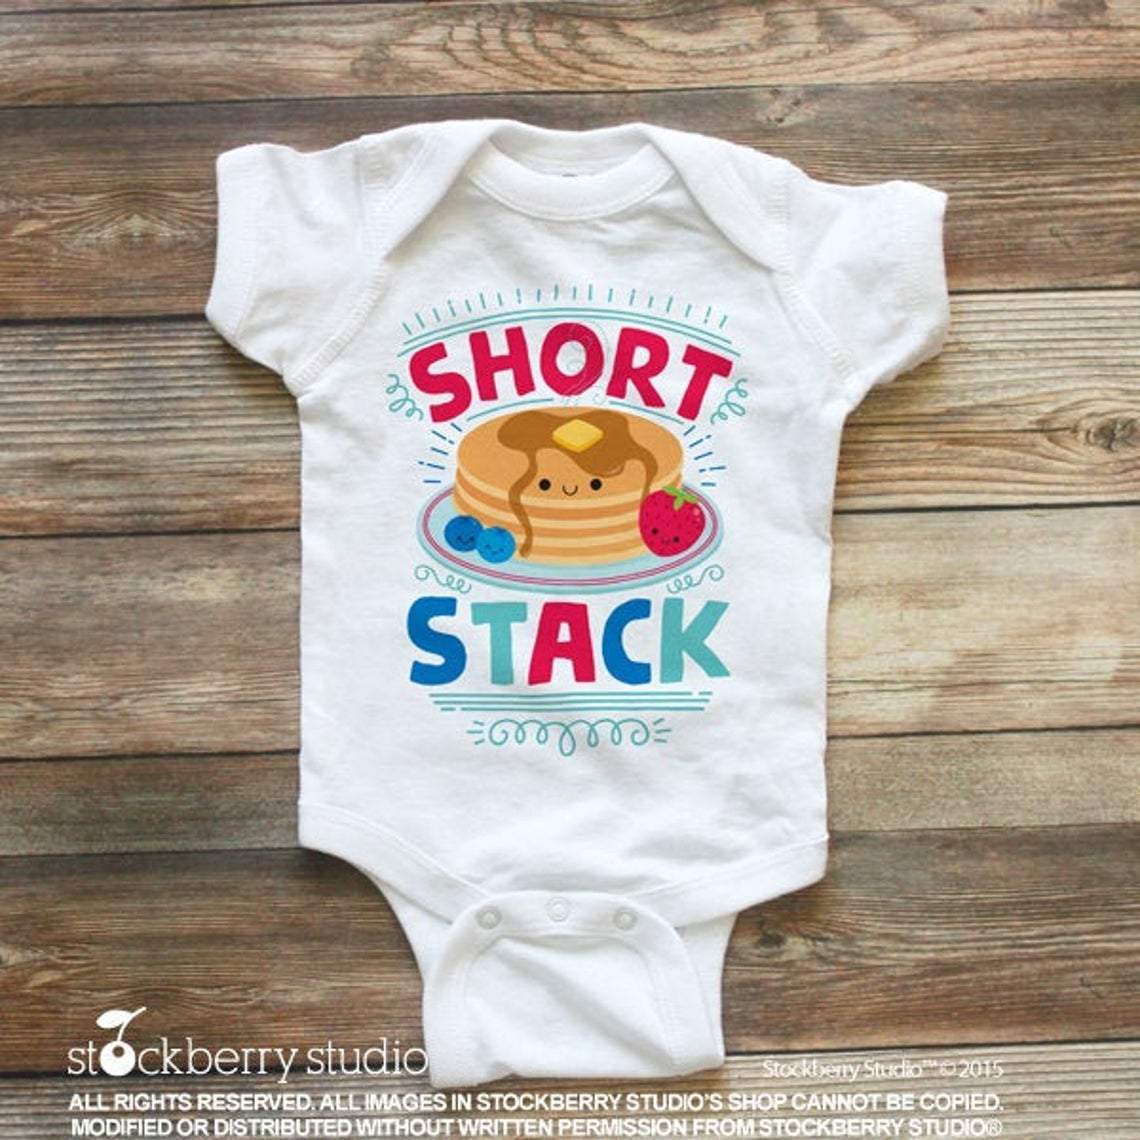 Short Stack Baby Outfit - Pancakes Shirt - Stockberry Studio